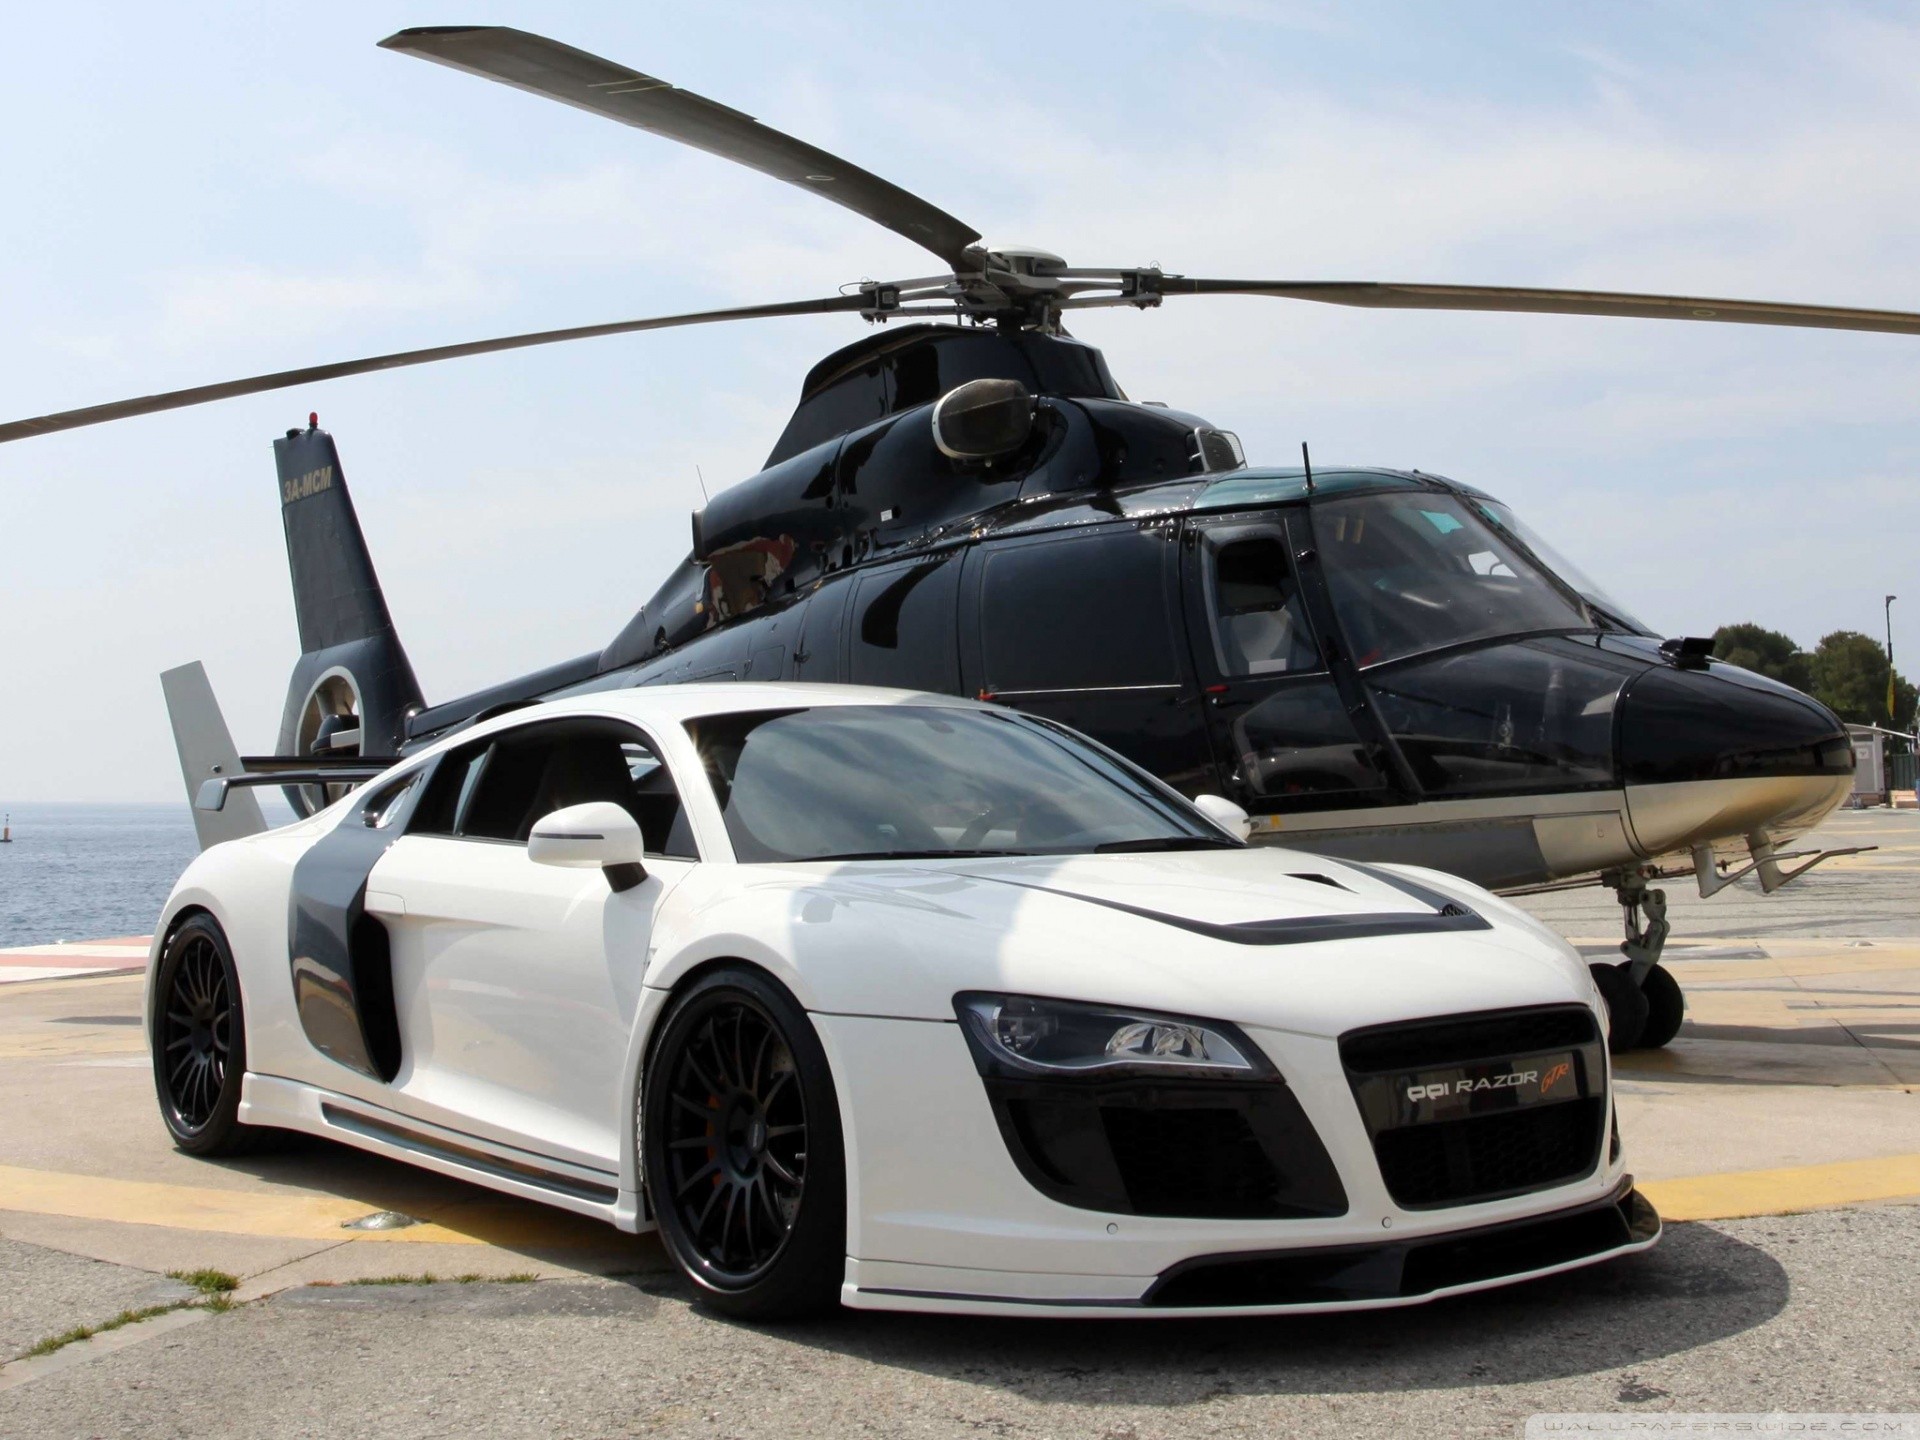 helicopters, Cars, Vehicles, Audi, R Audi, R Razor, Gtr Wallpaper HD / Desktop and Mobile Background